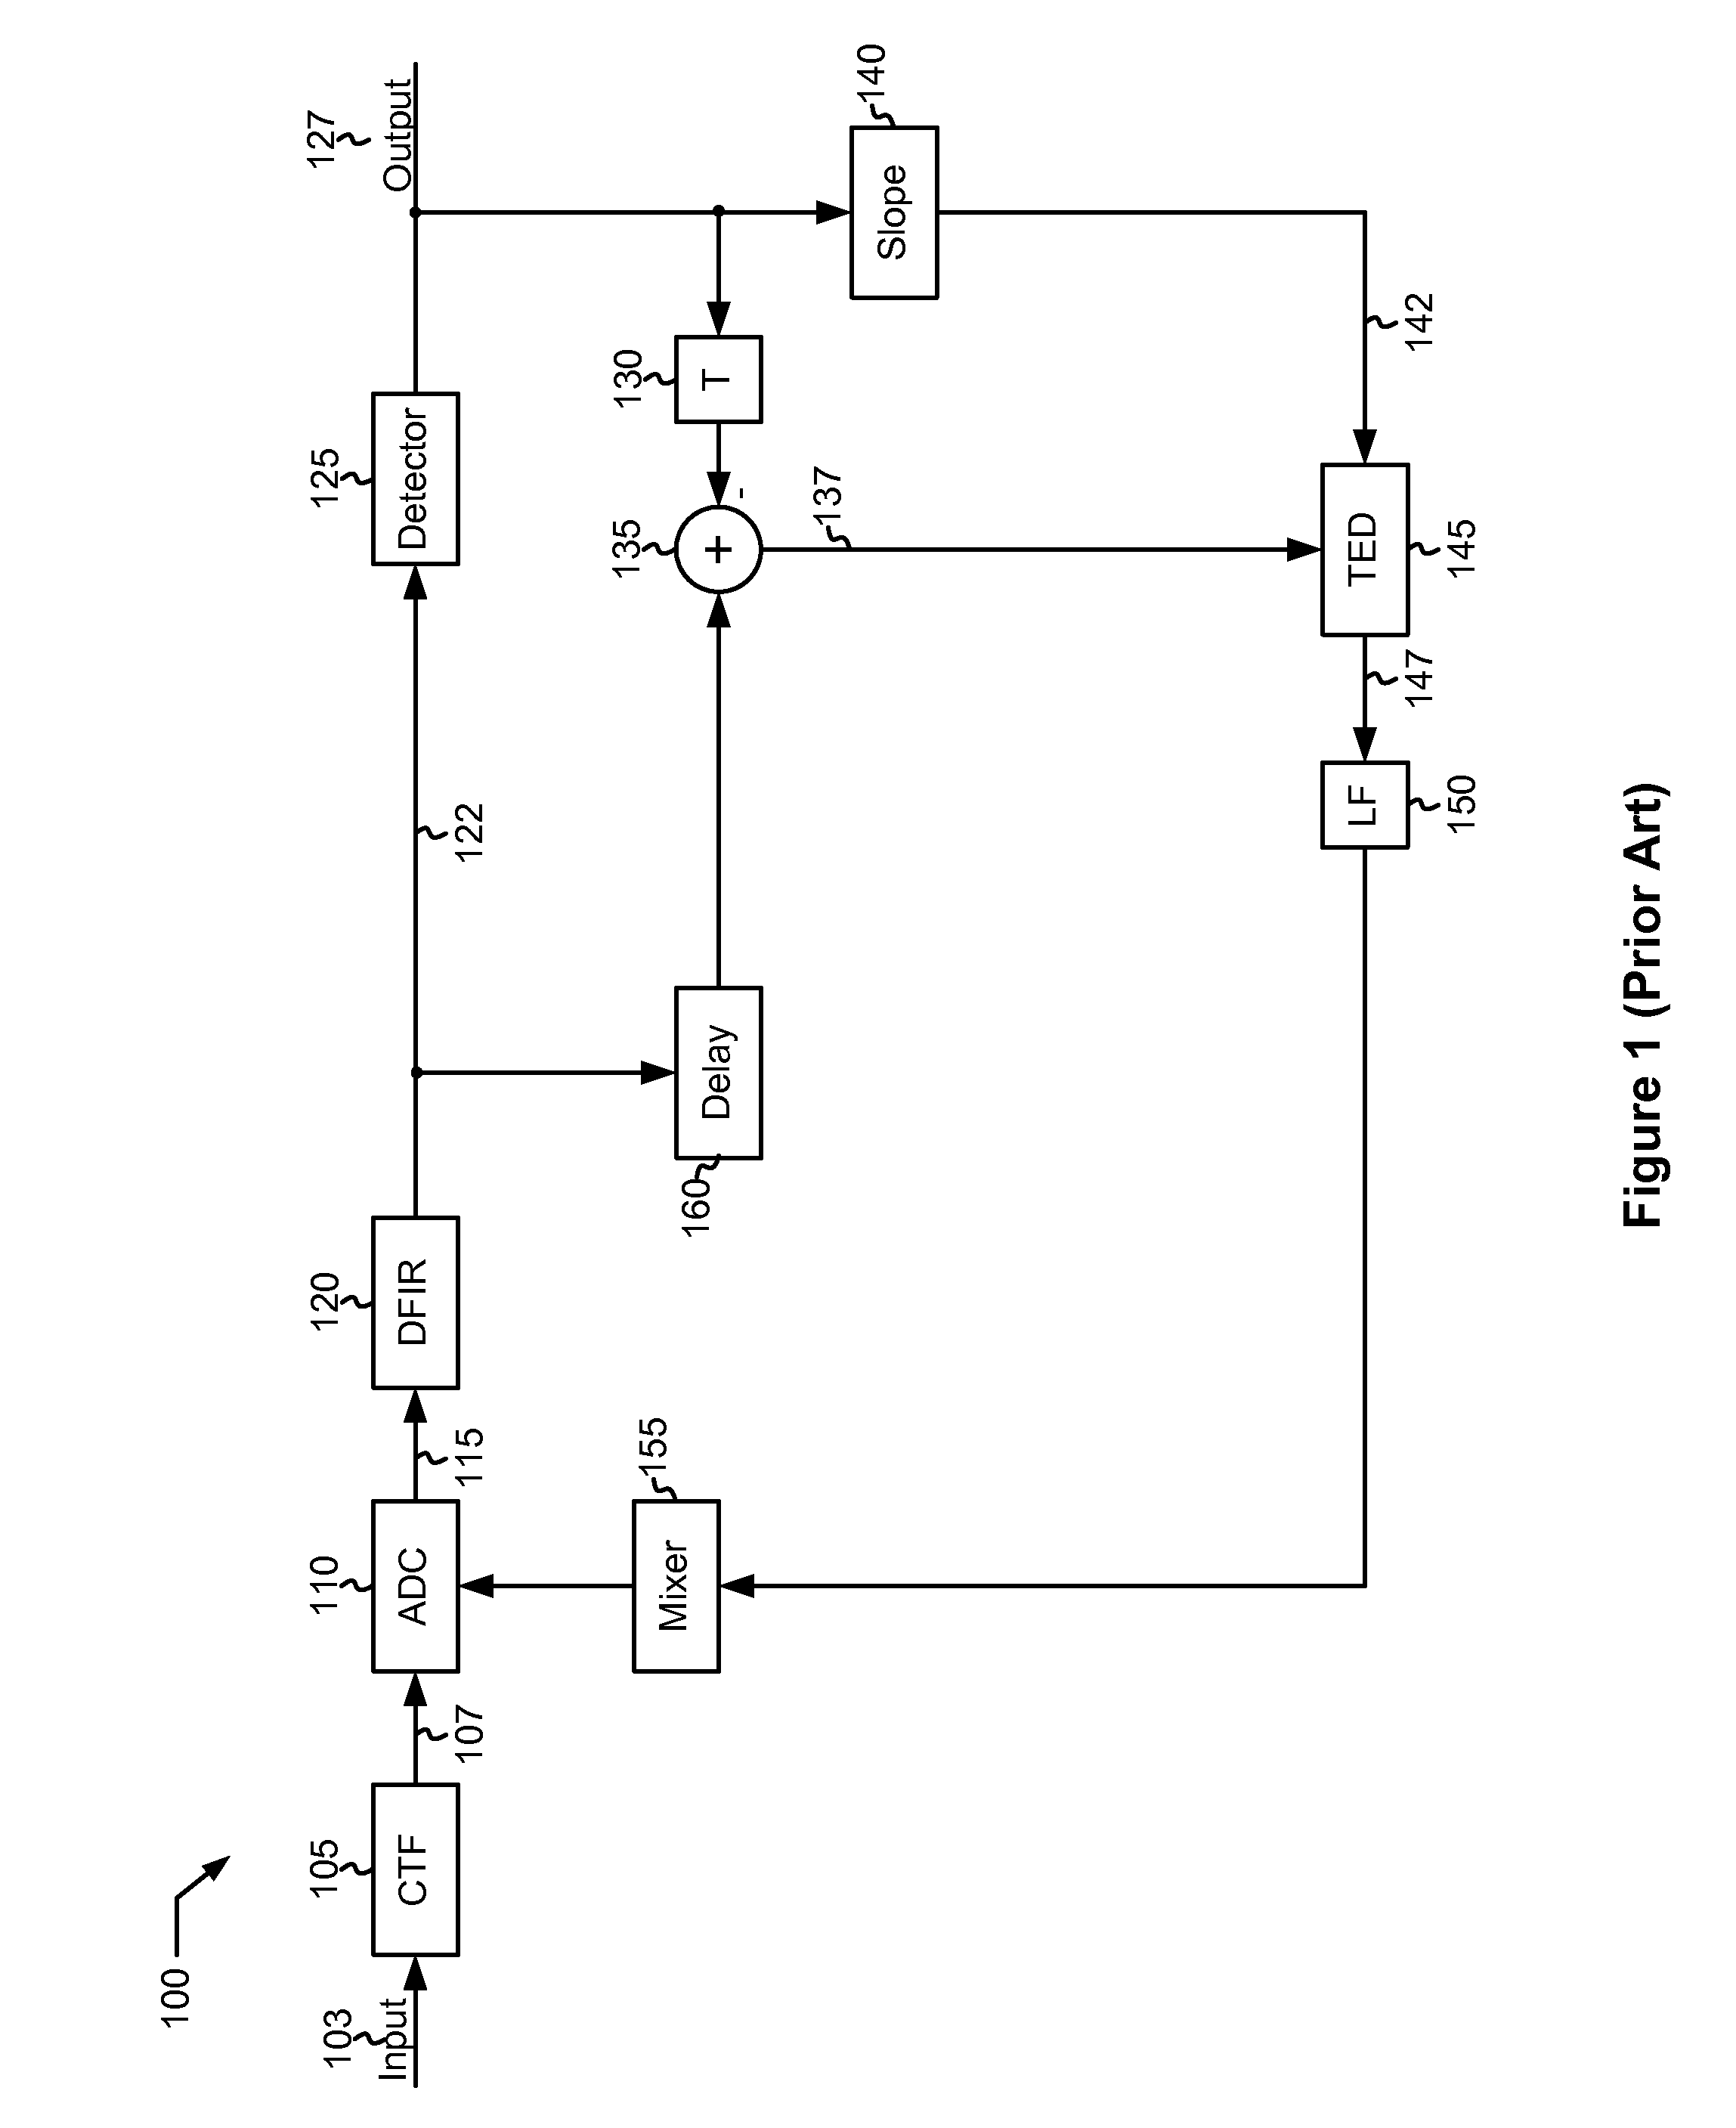 Systems and methods for mitigating latency in a data detector feedback loop